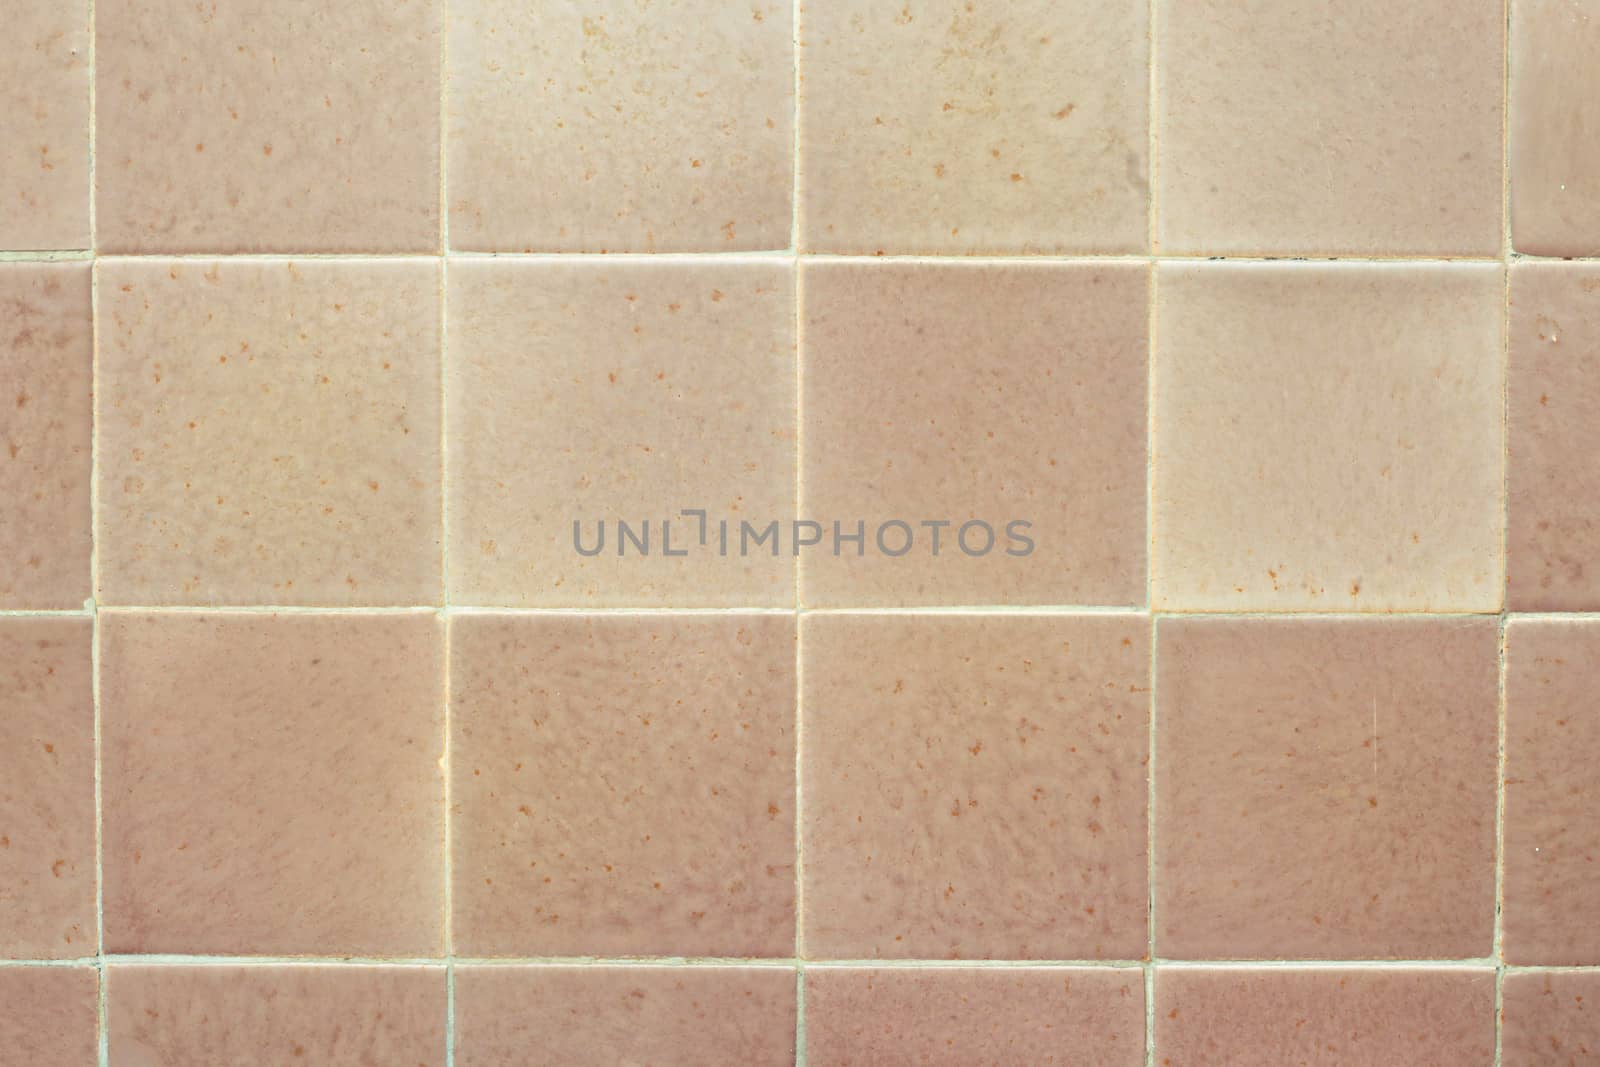 Pink and orange tiles as a background image